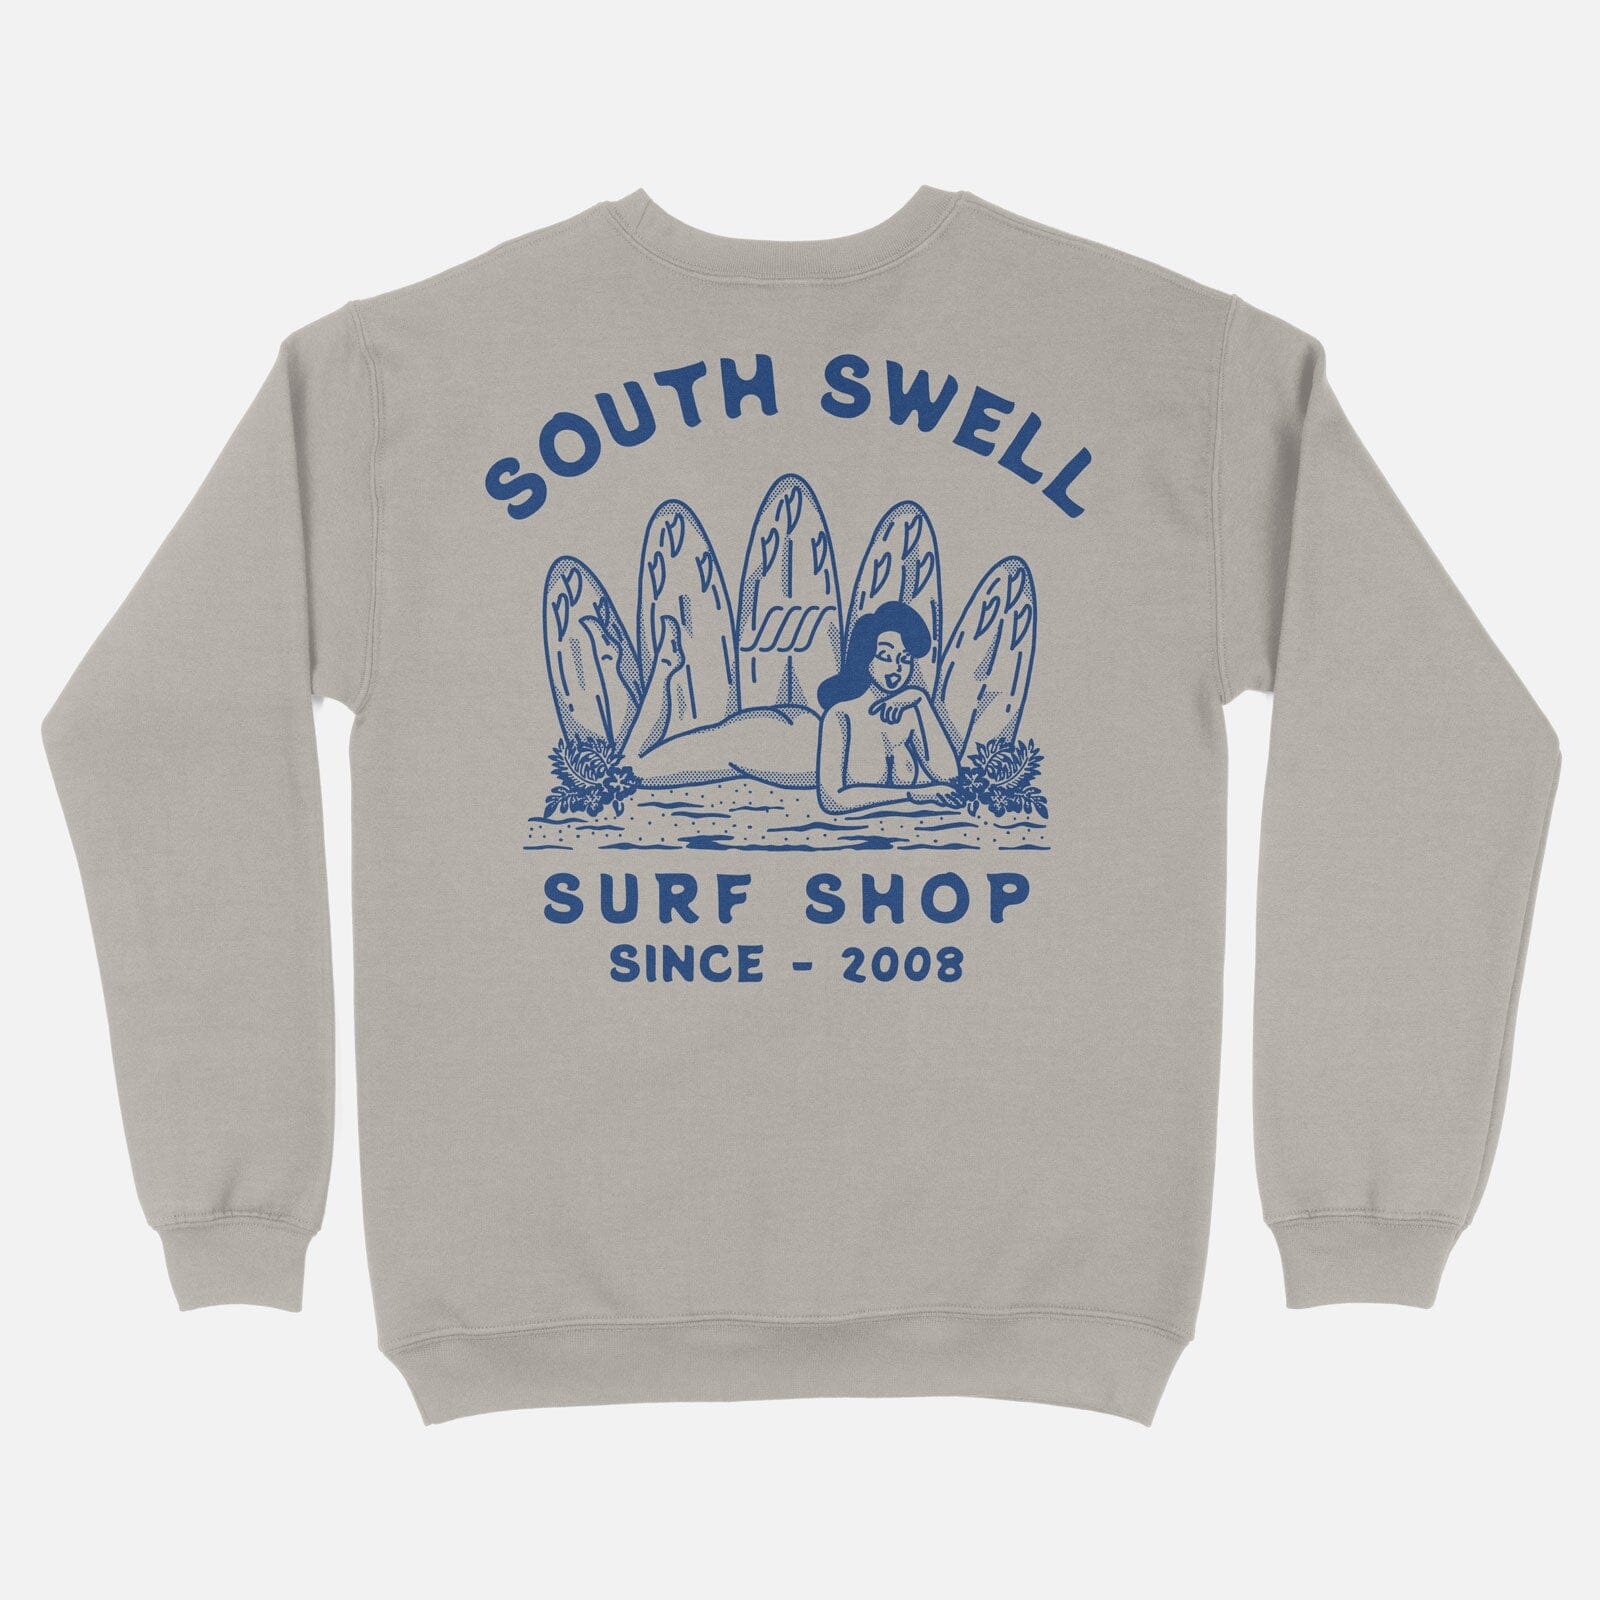 South Swell No Tan Lines Crewneck M Sweaters & Fleece SOUTH SWELL 